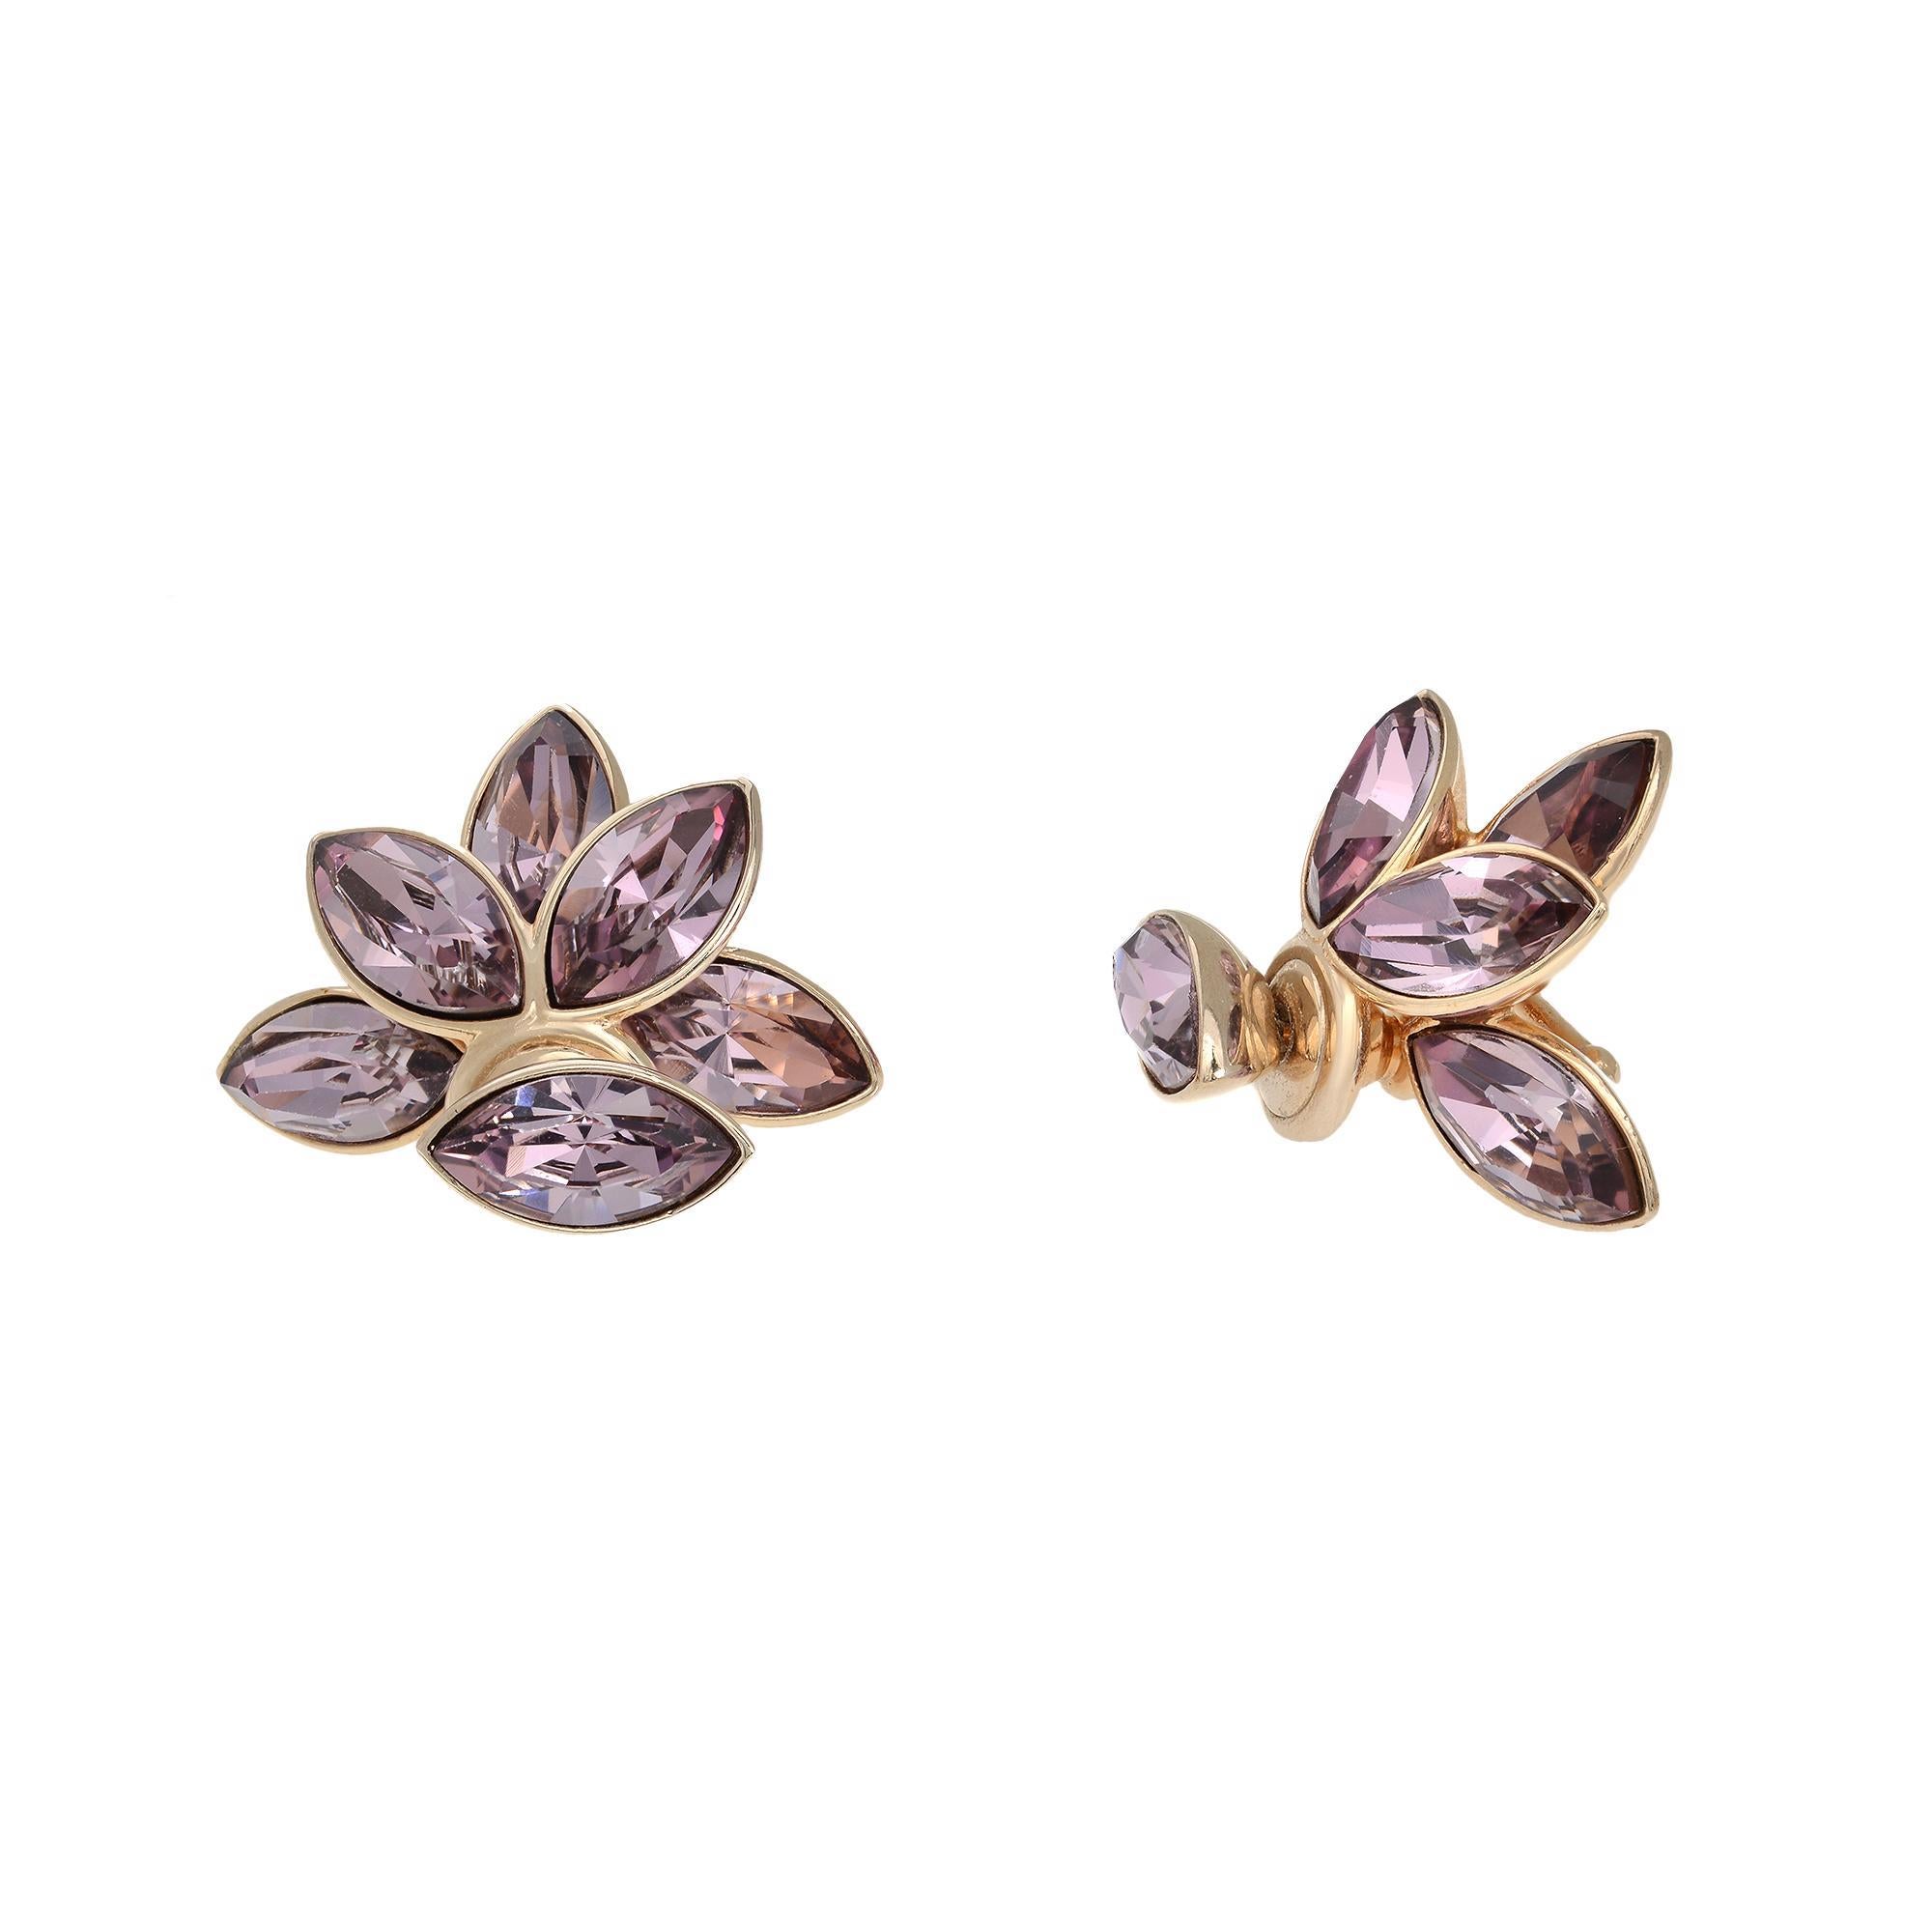 Purple crystal Mise En Tribal flower petal Stud Earrings crafted in gold tone. These gold tone metal earrings showcase crystal flowers at the back and a petal motif on the front. Earring size: 23x15mm. Excellent preowned condition. The original box